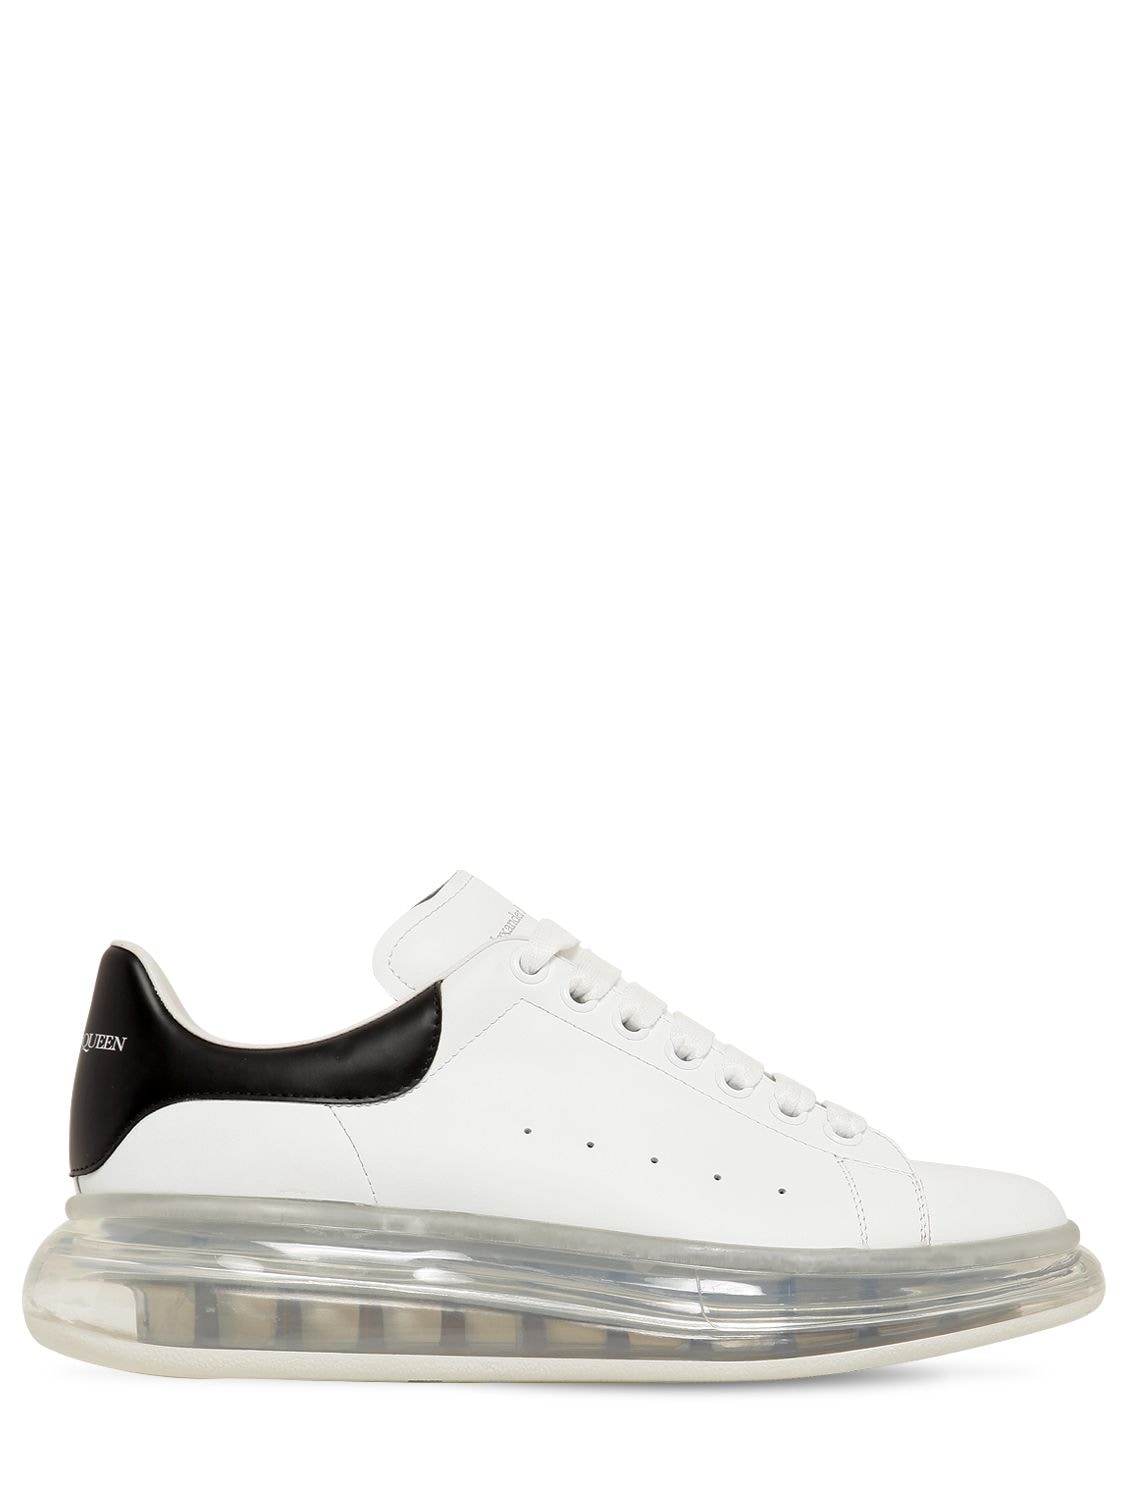 Shop Alexander Mcqueen 45mm Oversized Leather Sneakers In White,black